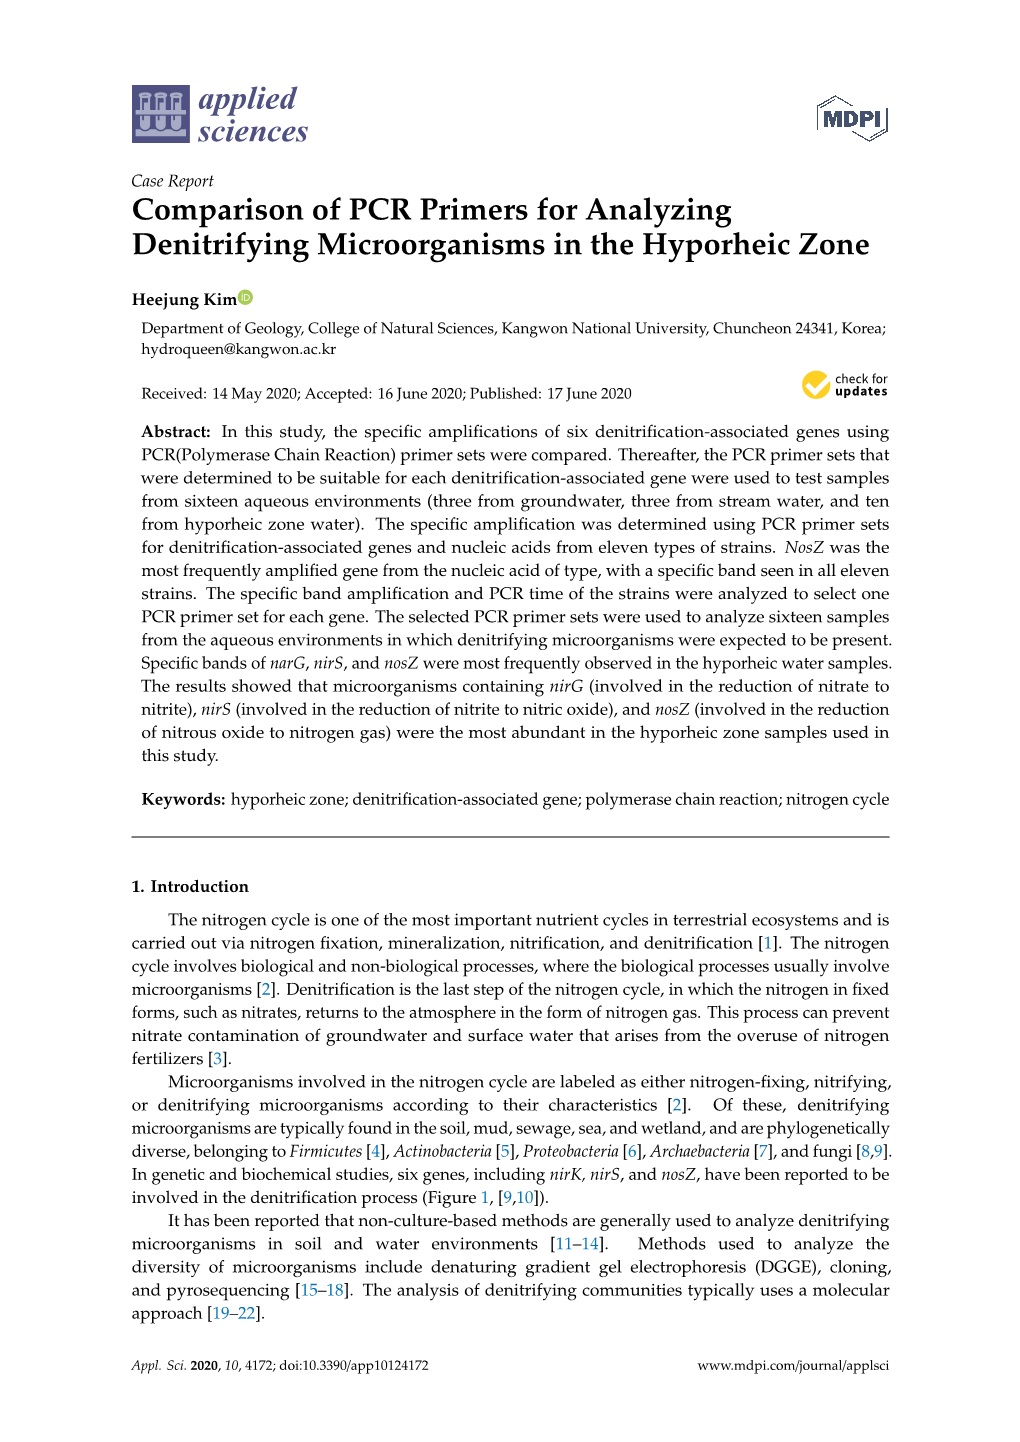 Comparison of PCR Primers for Analyzing Denitrifying Microorganisms in the Hyporheic Zone